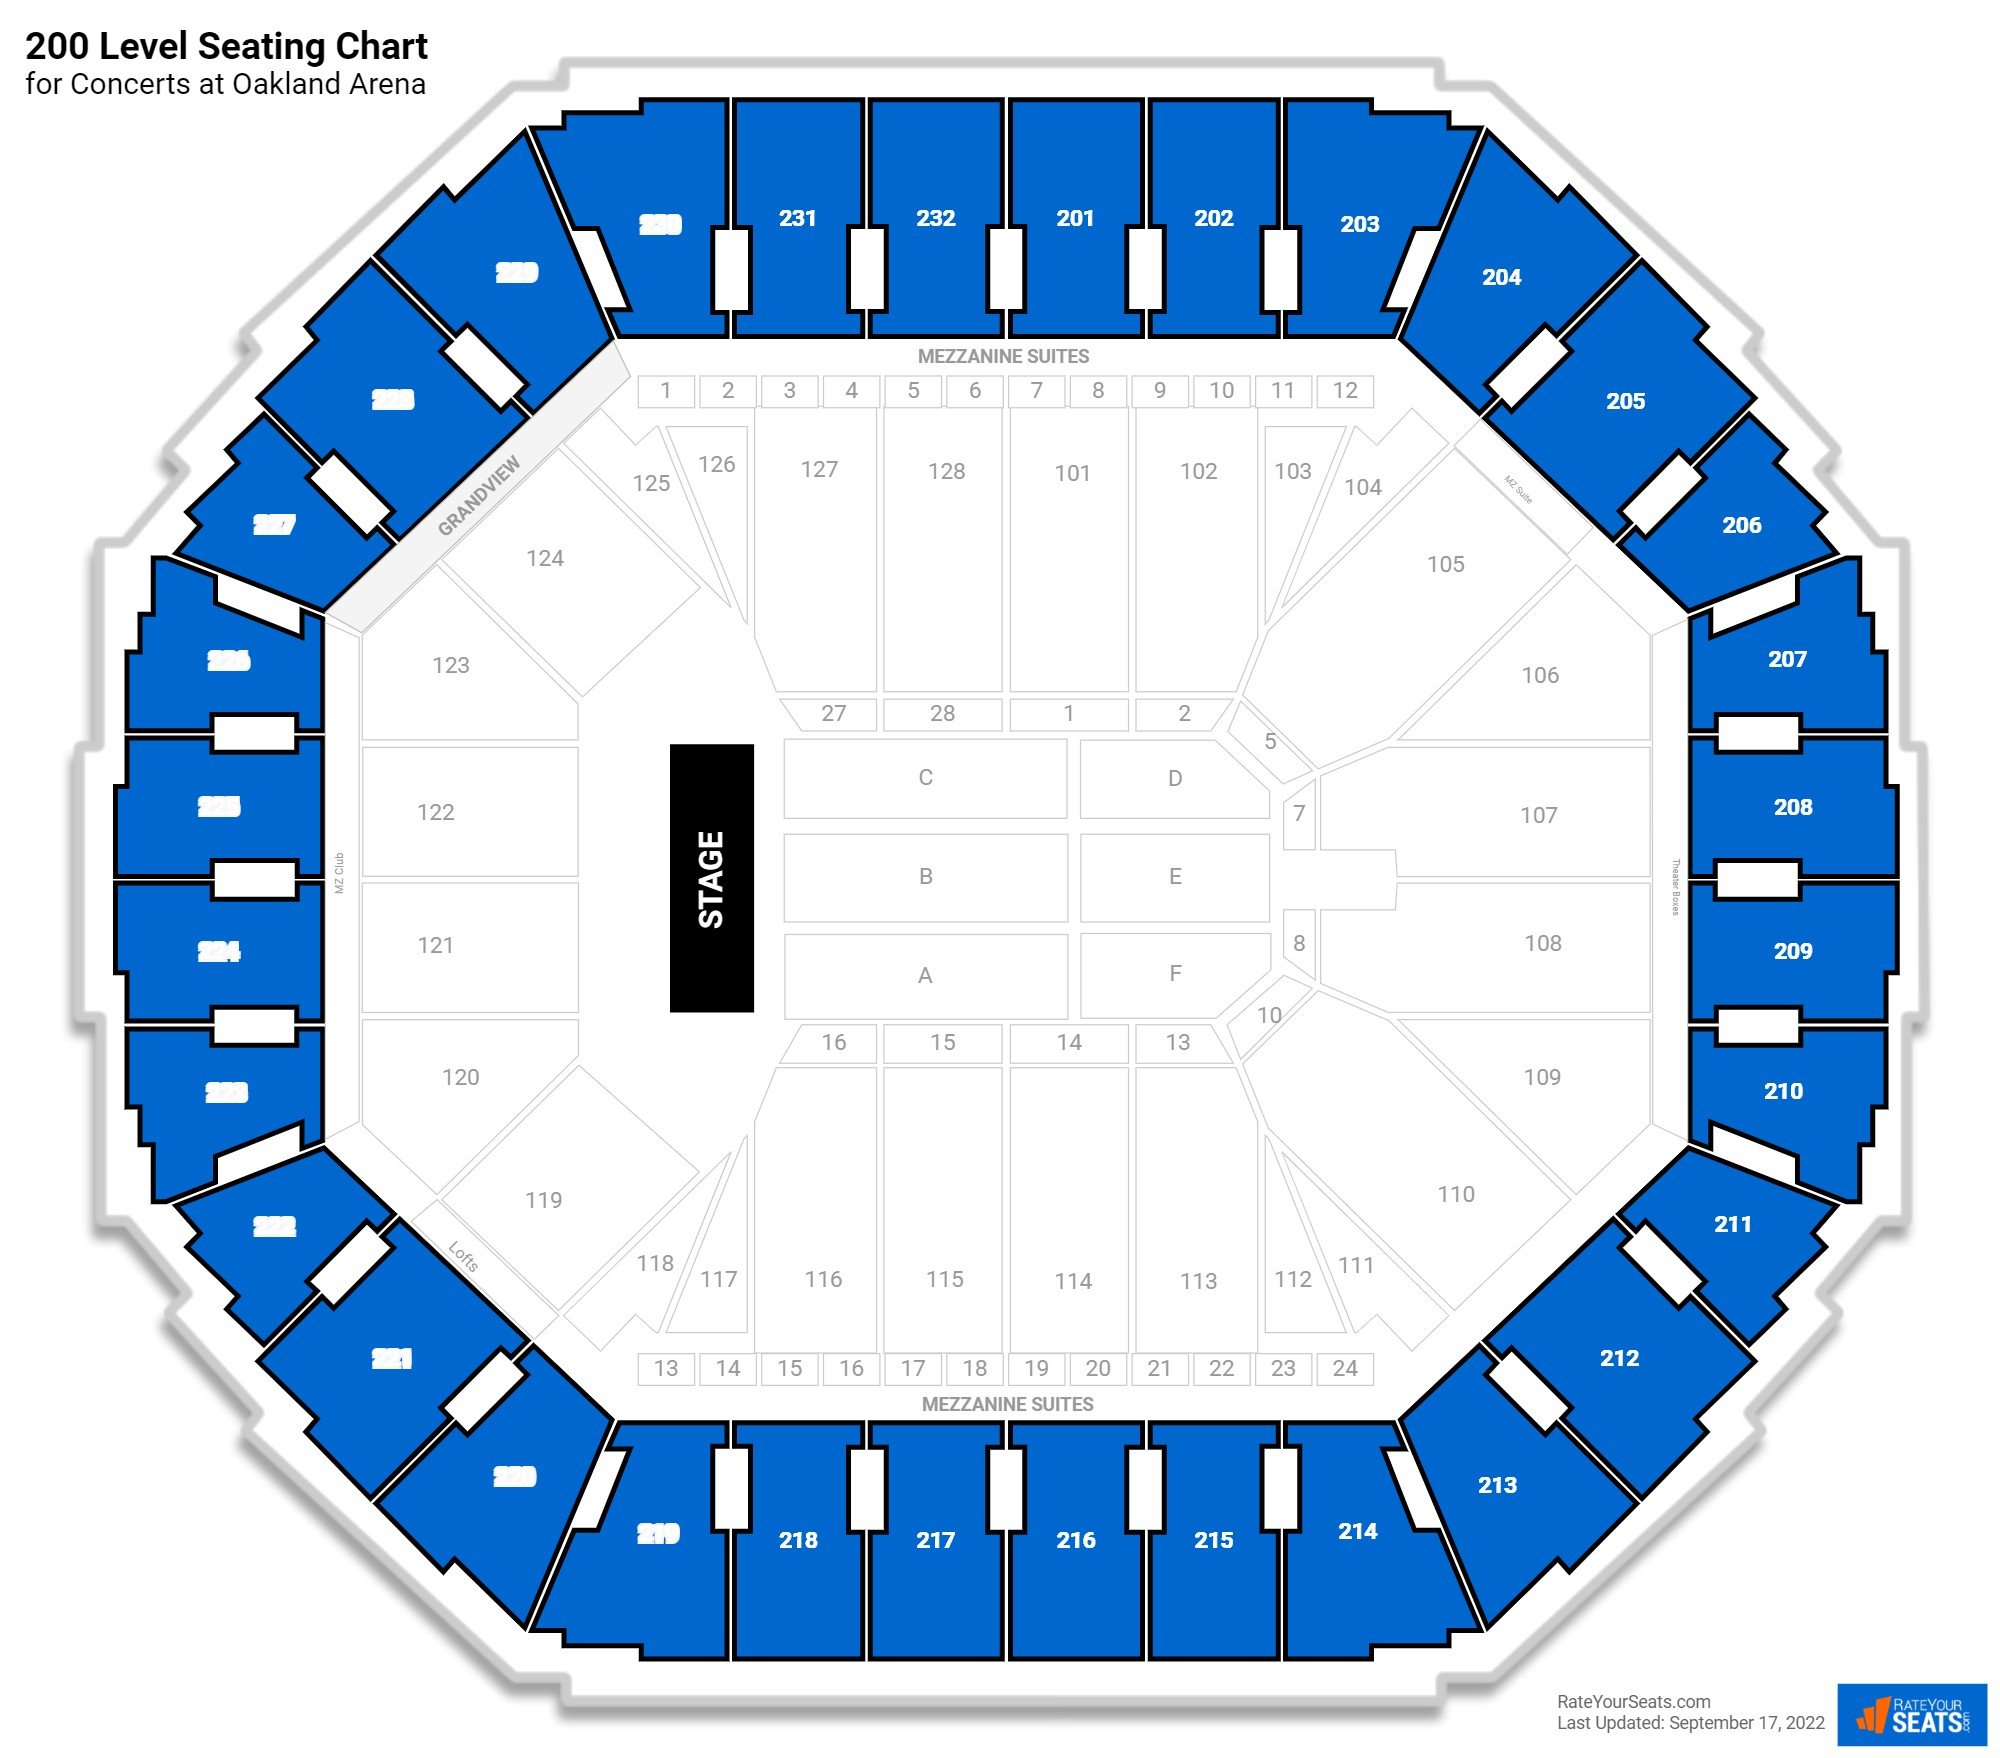 Concert 200 Level Seating Chart at Oakland Arena